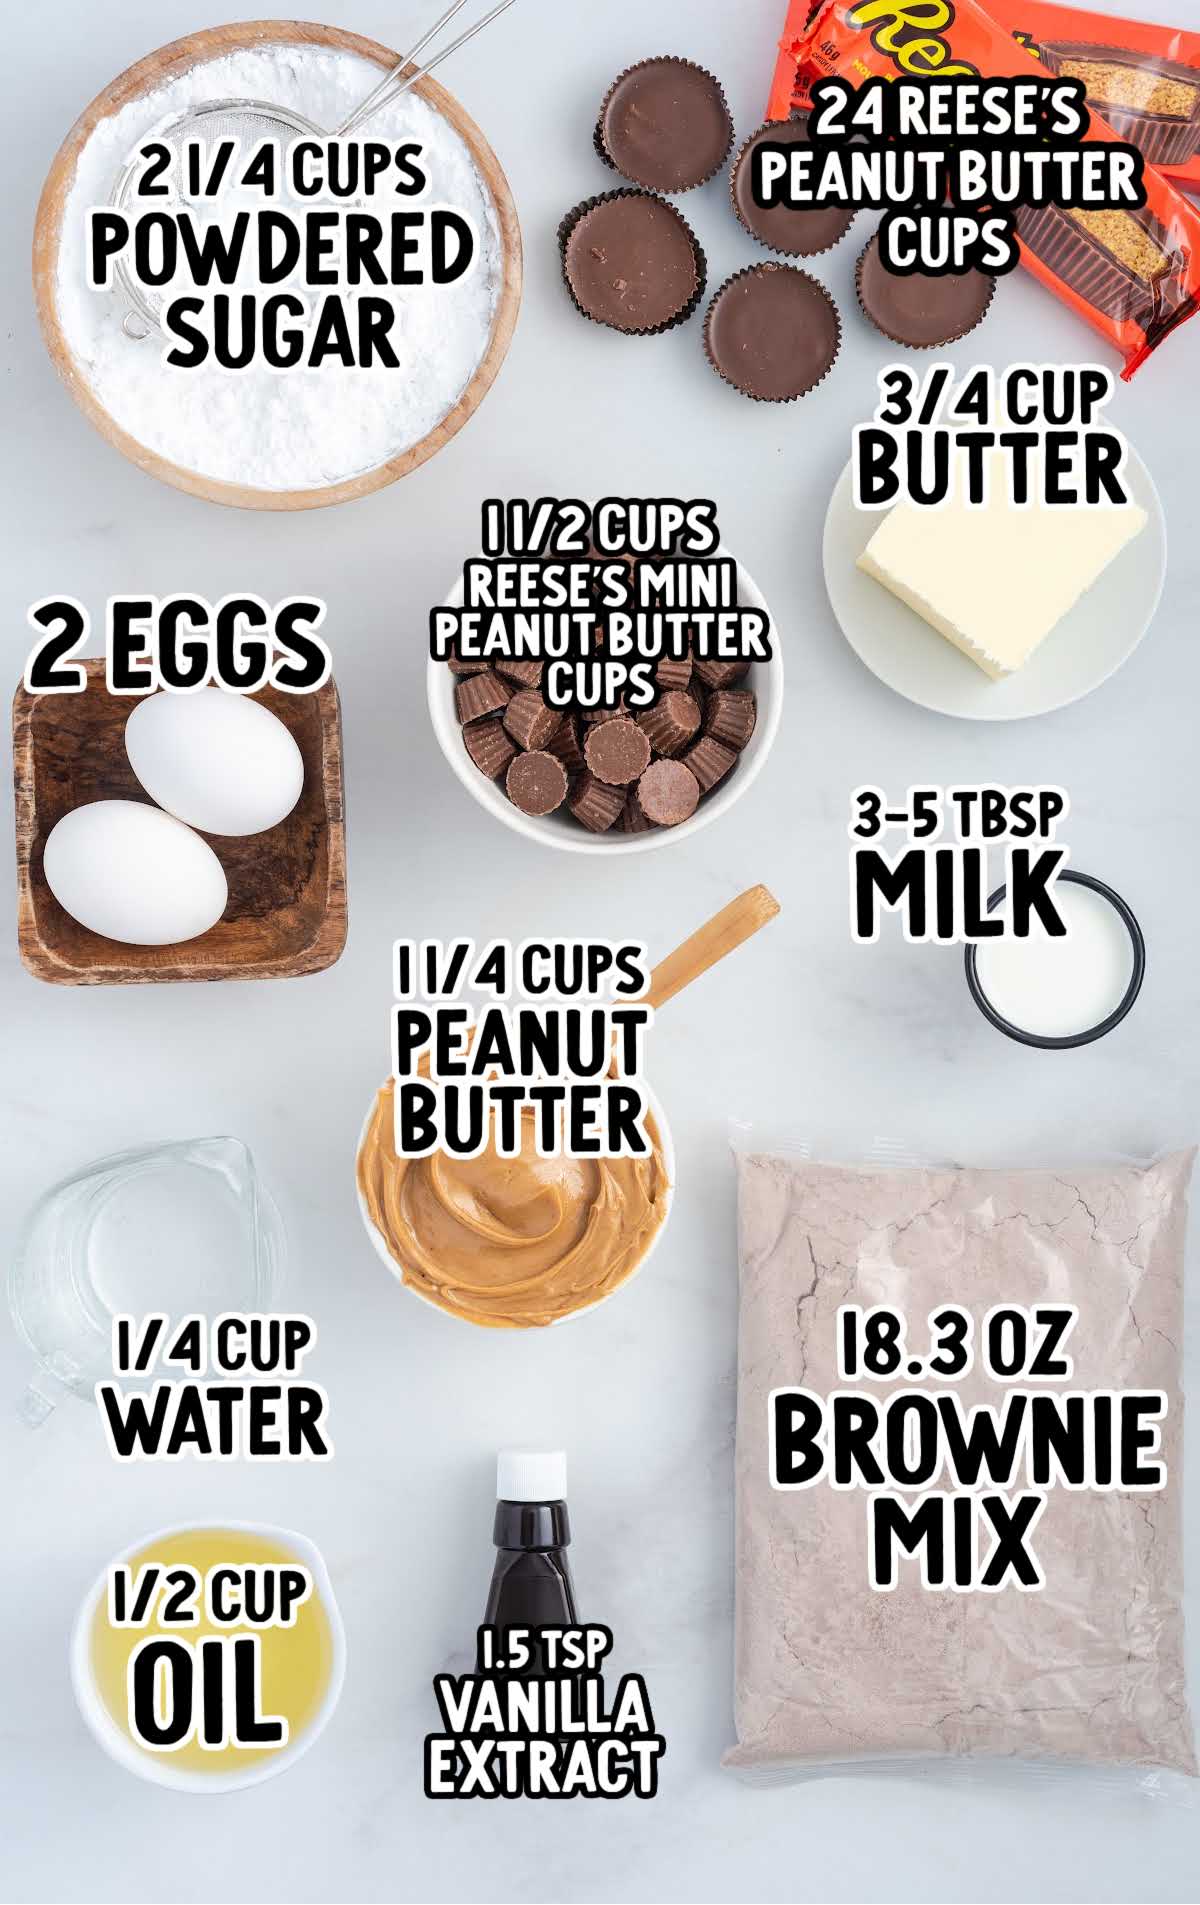 Reese's Peanut Butter Cupcakes raw ingredients that are labeled